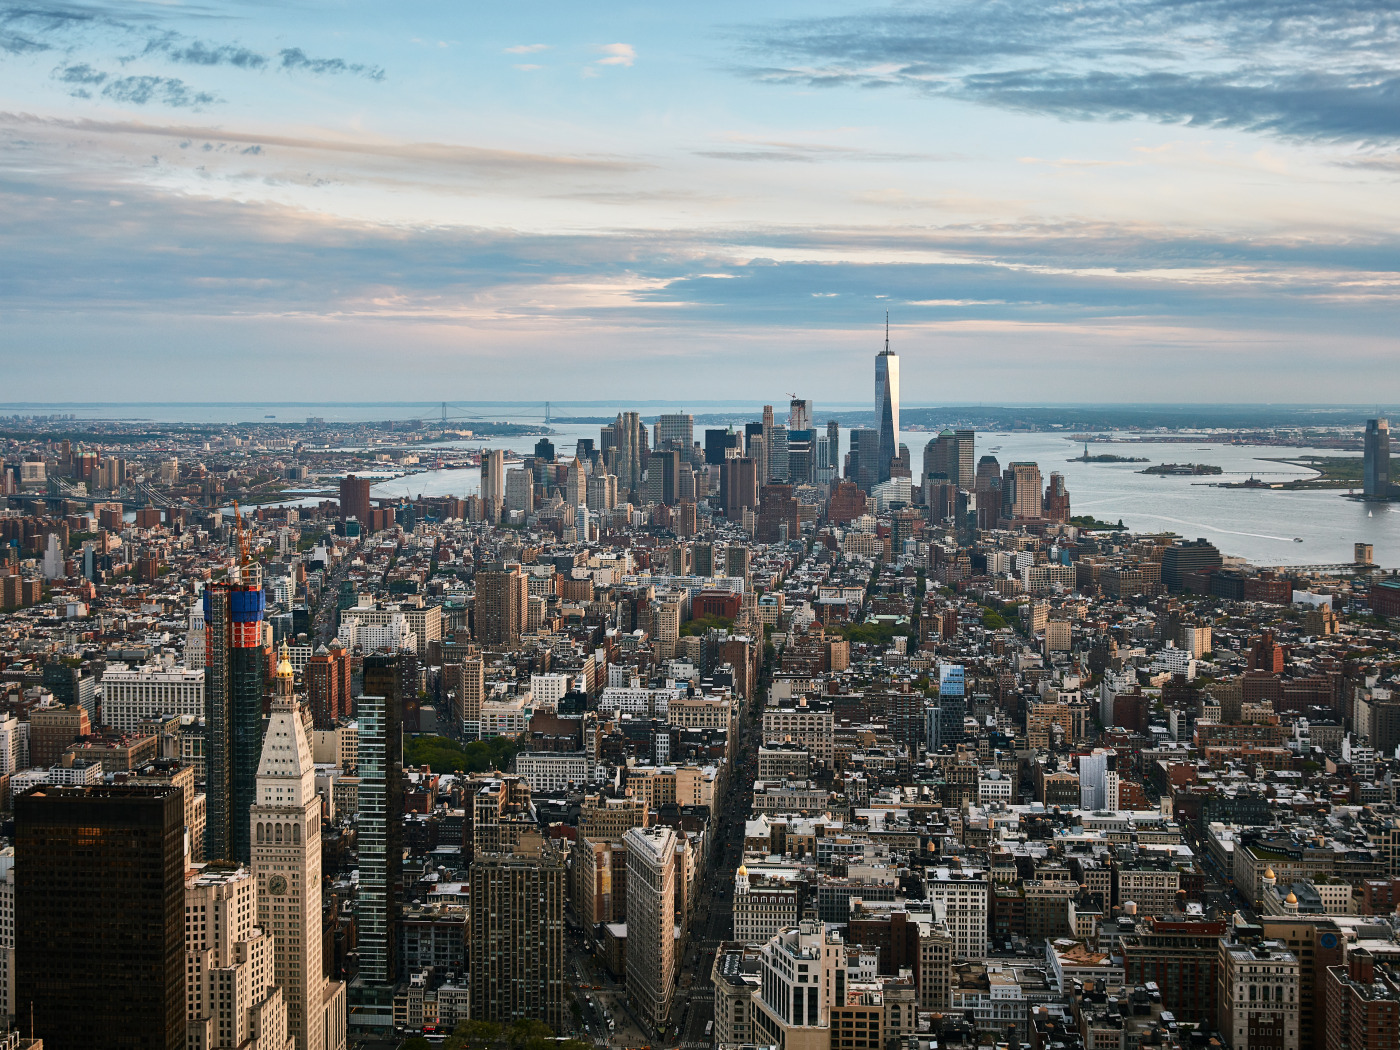 Is new york one of the largest cities in the world was фото 99